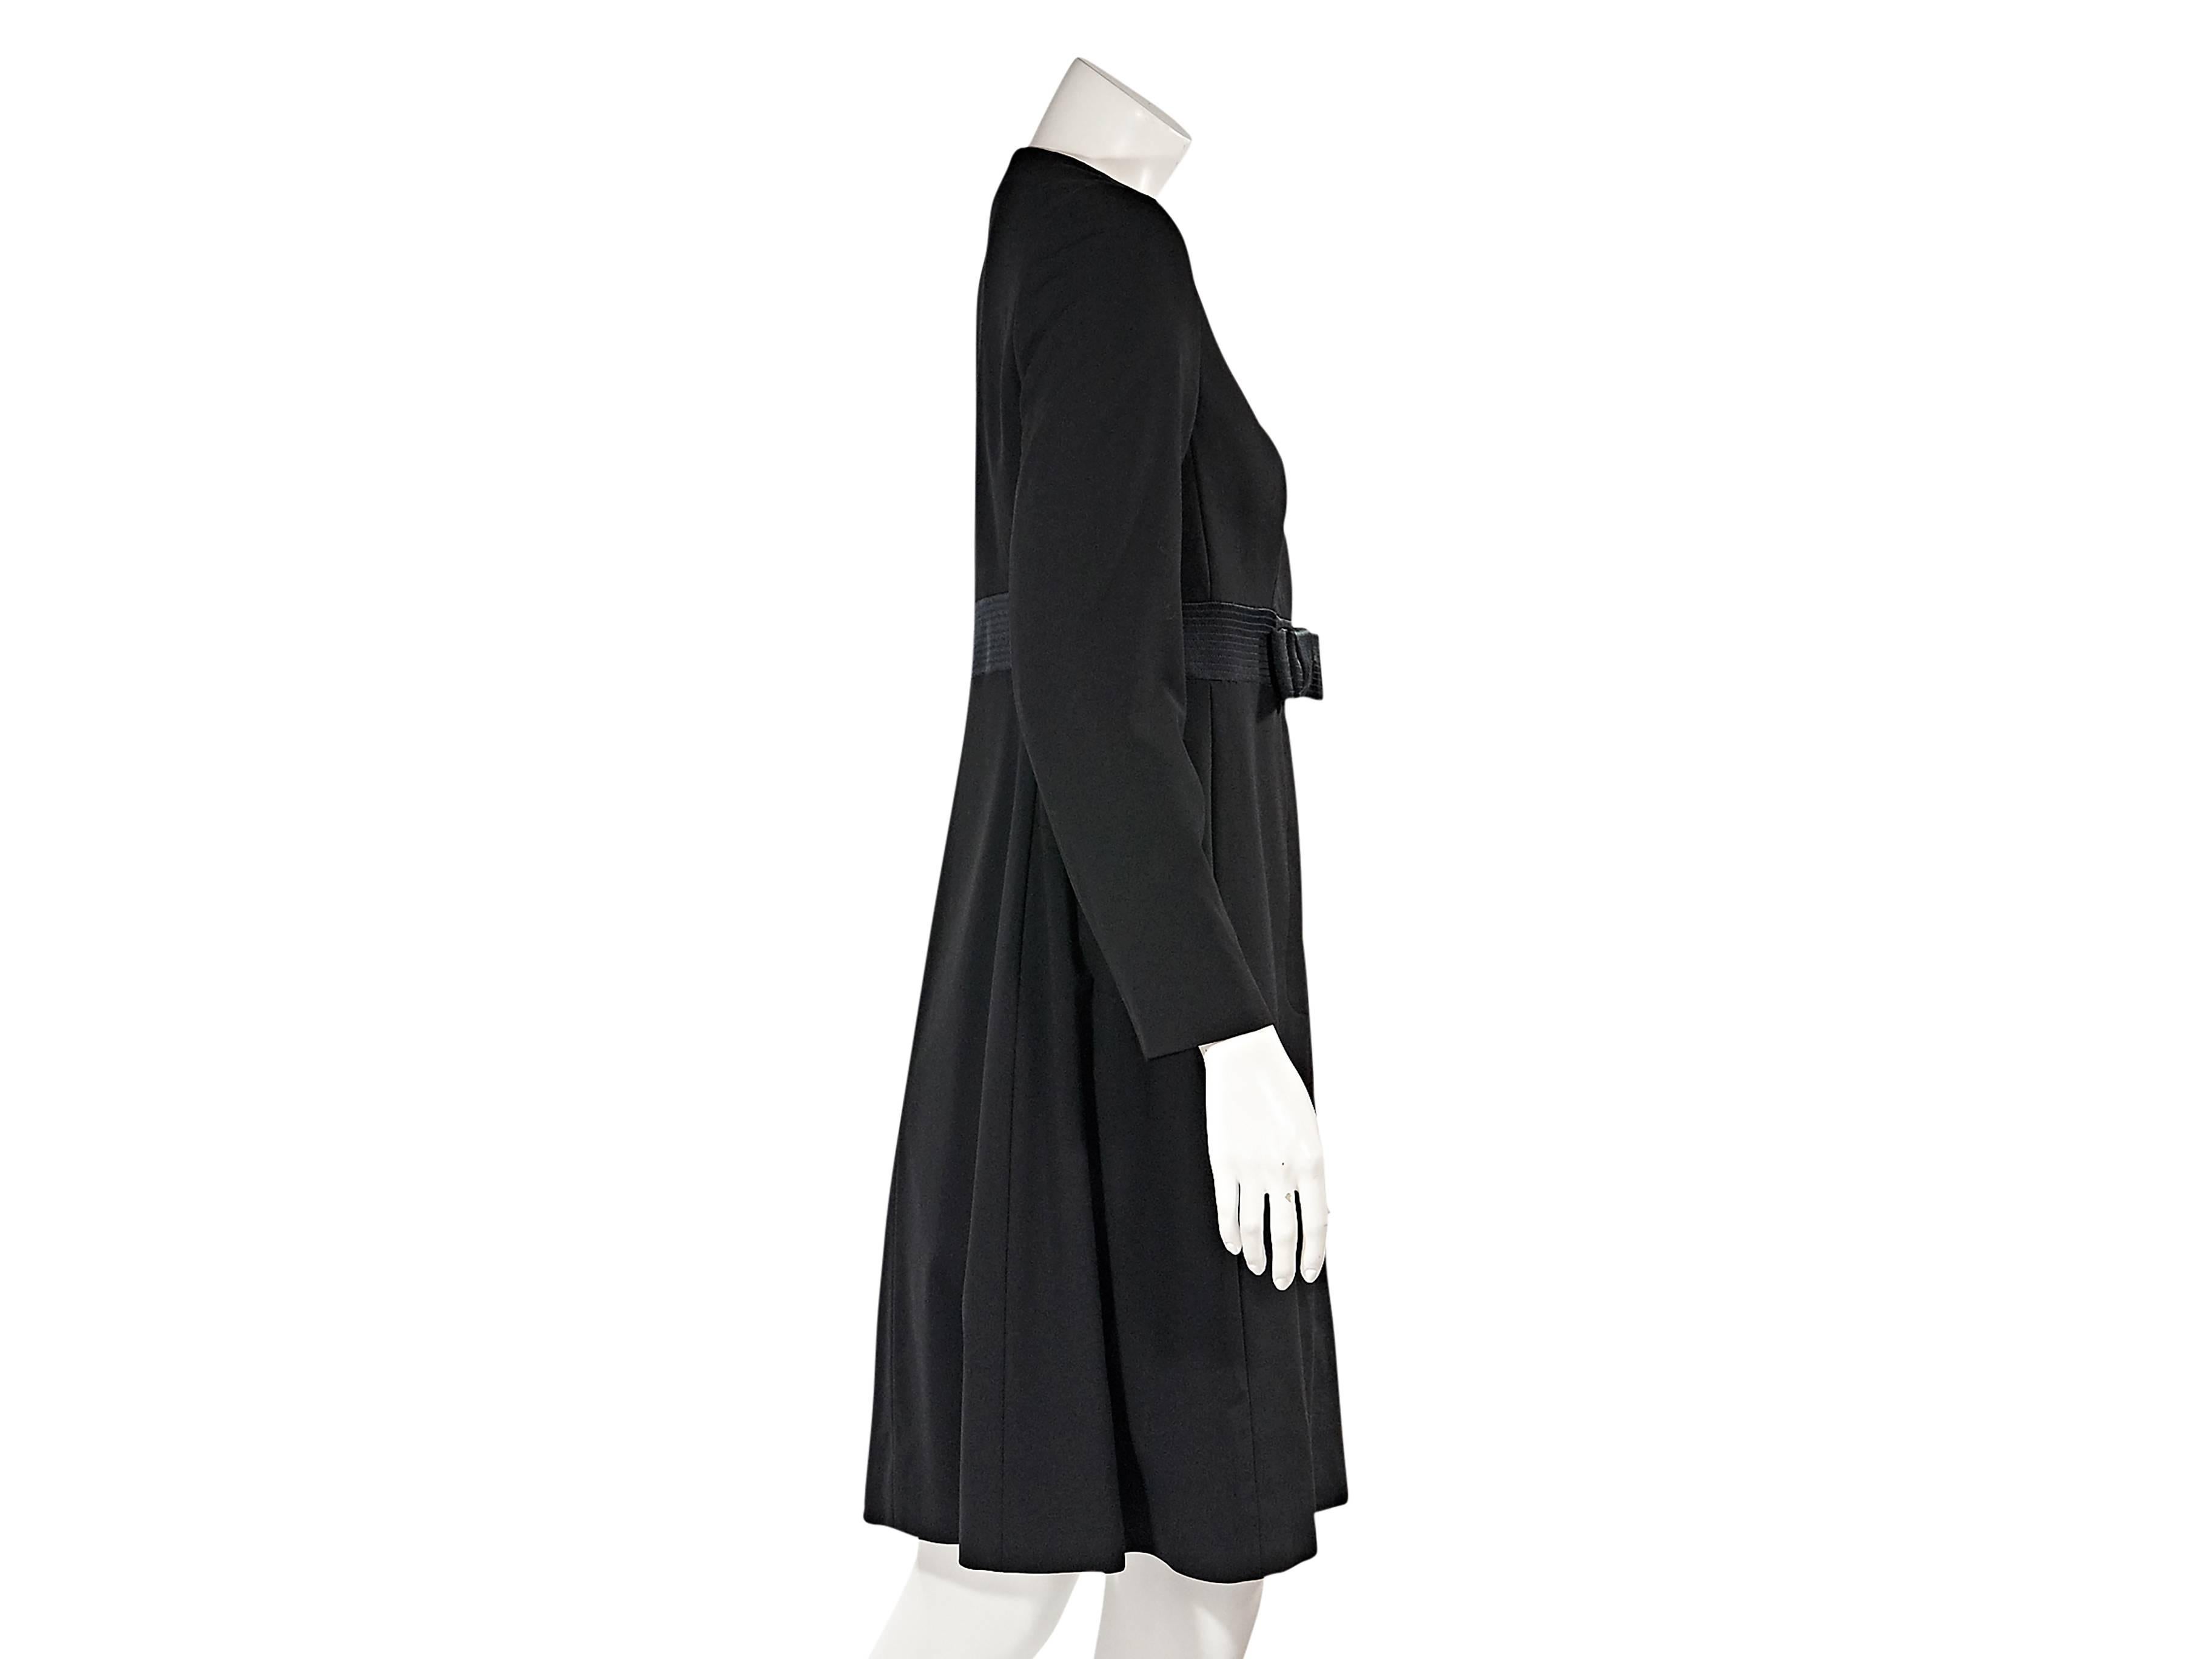 Product details:  ﻿Black wool coat by Celine.  Jewelneck.  Long sleeves.  Concealed snap front closure.  Banded waist accented with a bow. 
Condition: Excellent. 
Estimated retail: $2995